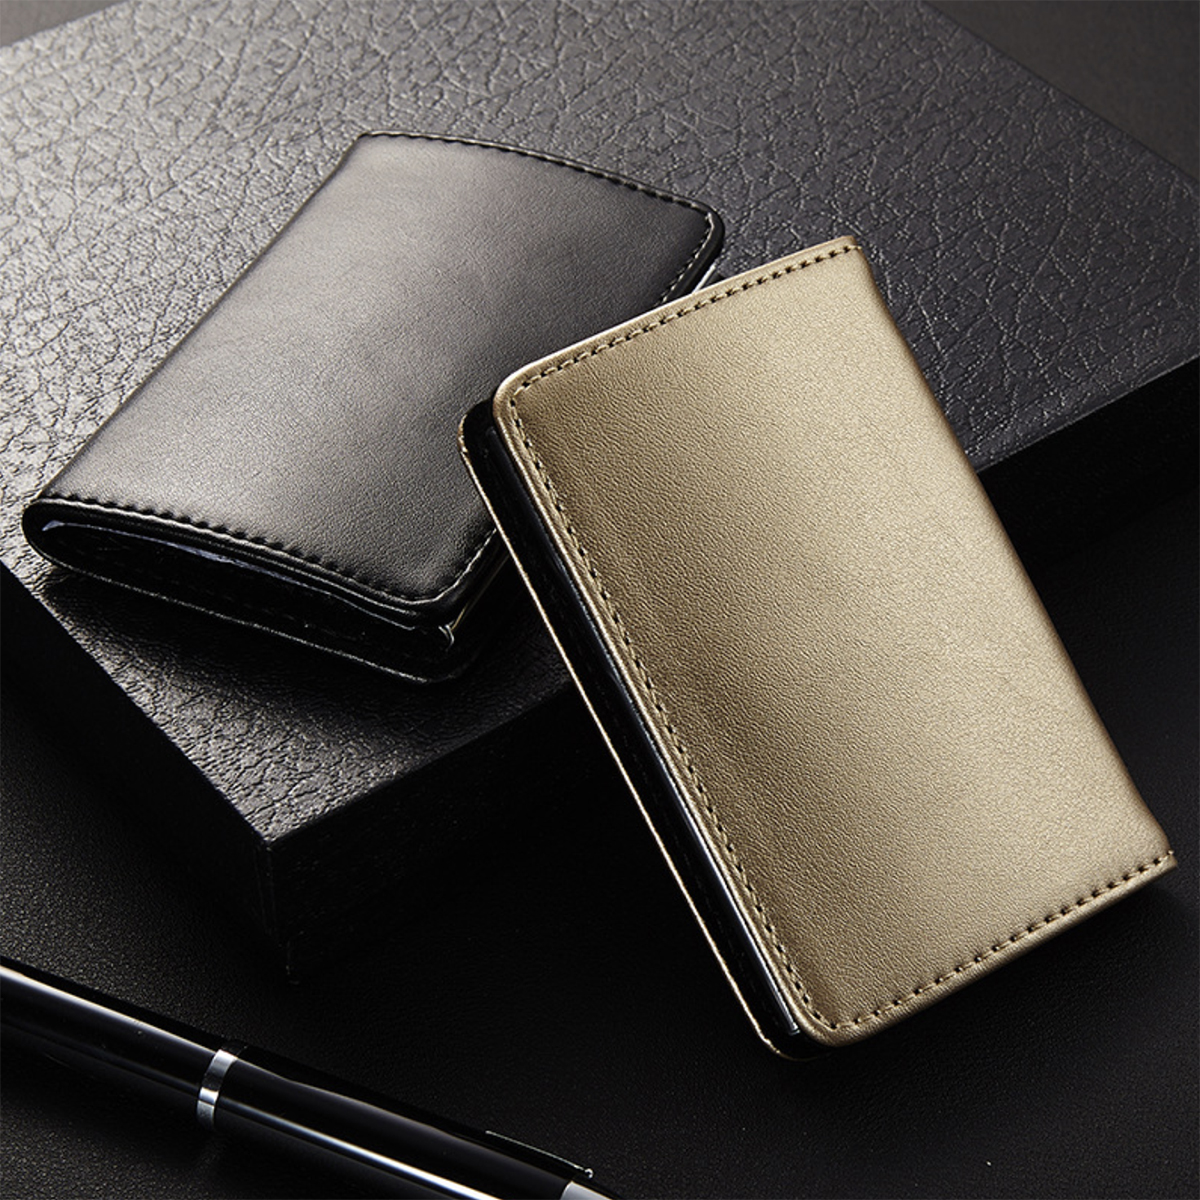 Stainless Steel PU Leather Card Holder